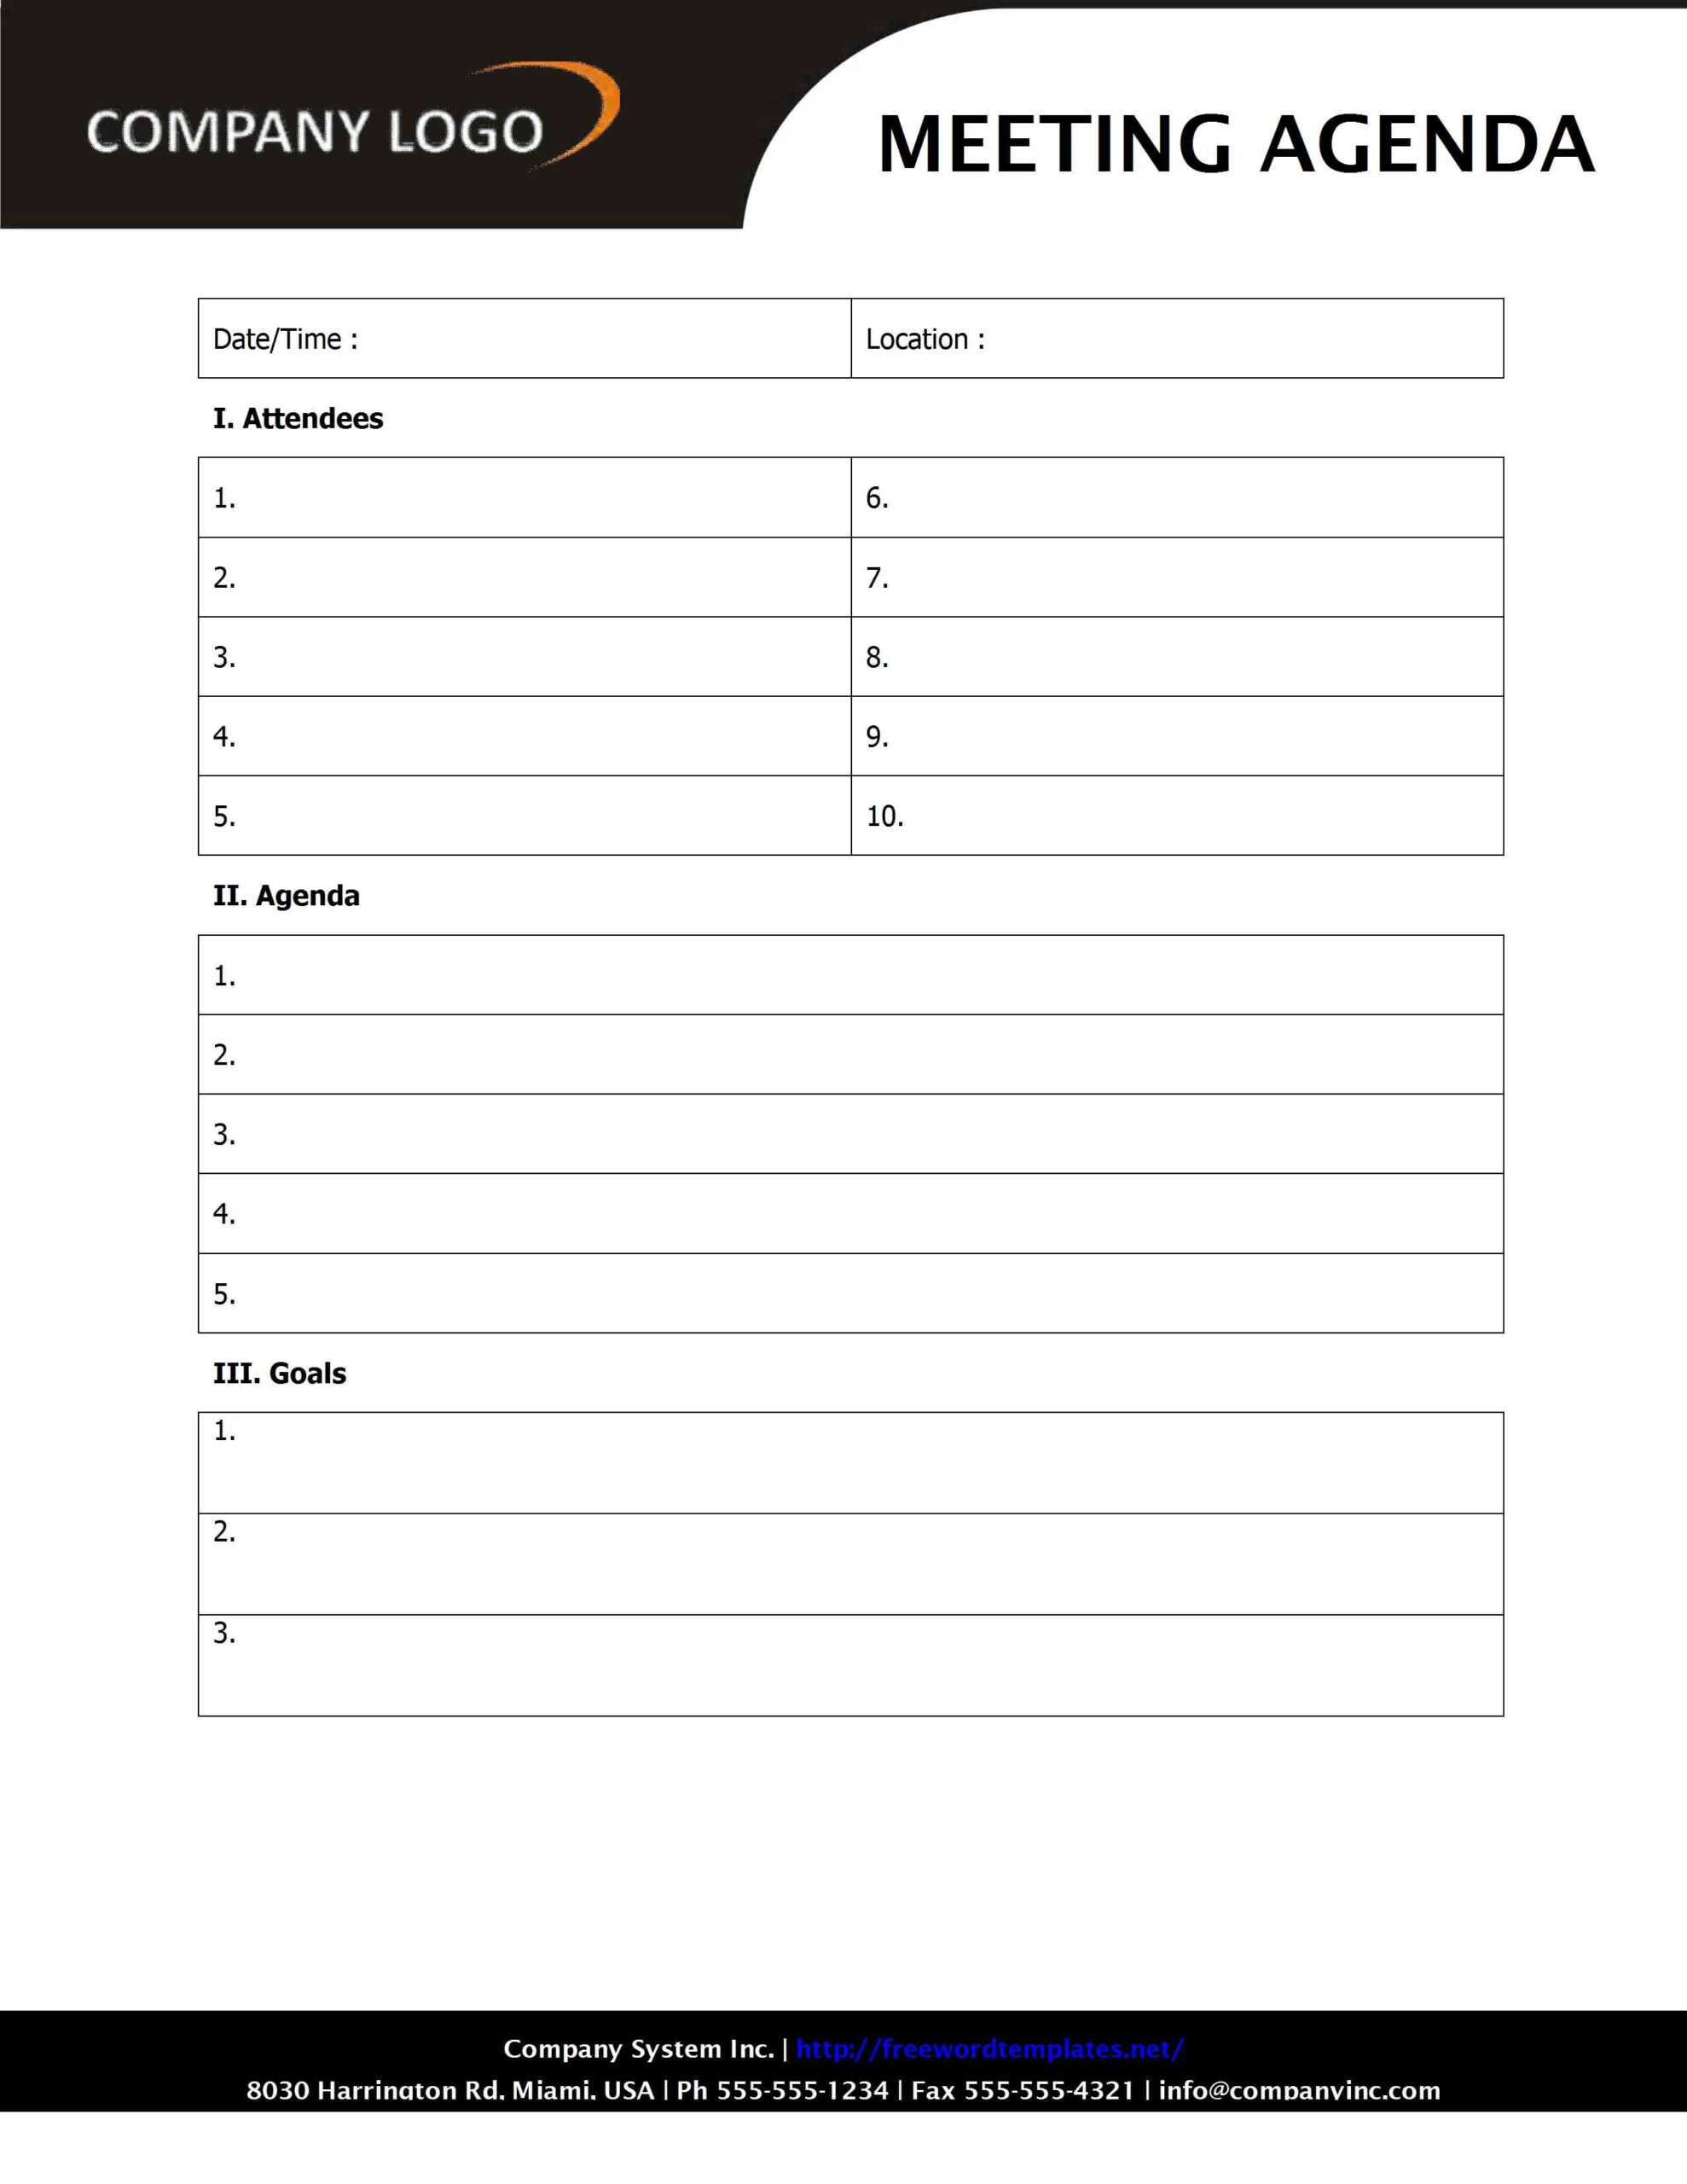 Templates Of Meeting Agenda Sd1 Style Intended For Free Meeting Agenda Templates For Word